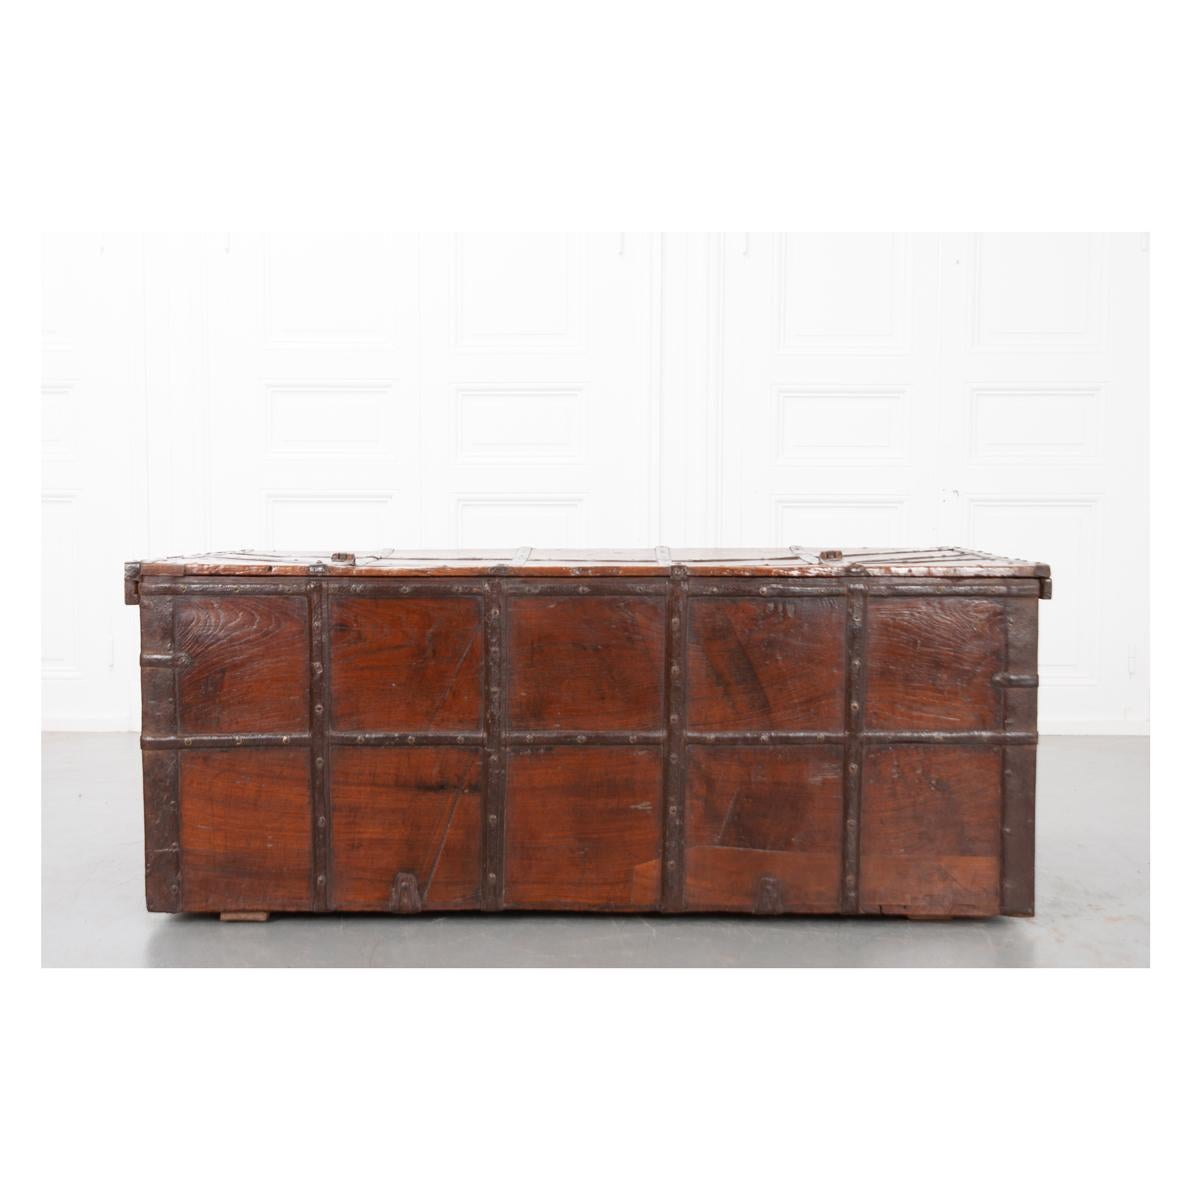 This 19th century, Anglo-Indian solid teak trunk with original iron bindings has aged beautifully. It has a striking patina with fantastic texture and grain. The hinged top has two forged iron hasps that would have been pinned close with an iron or